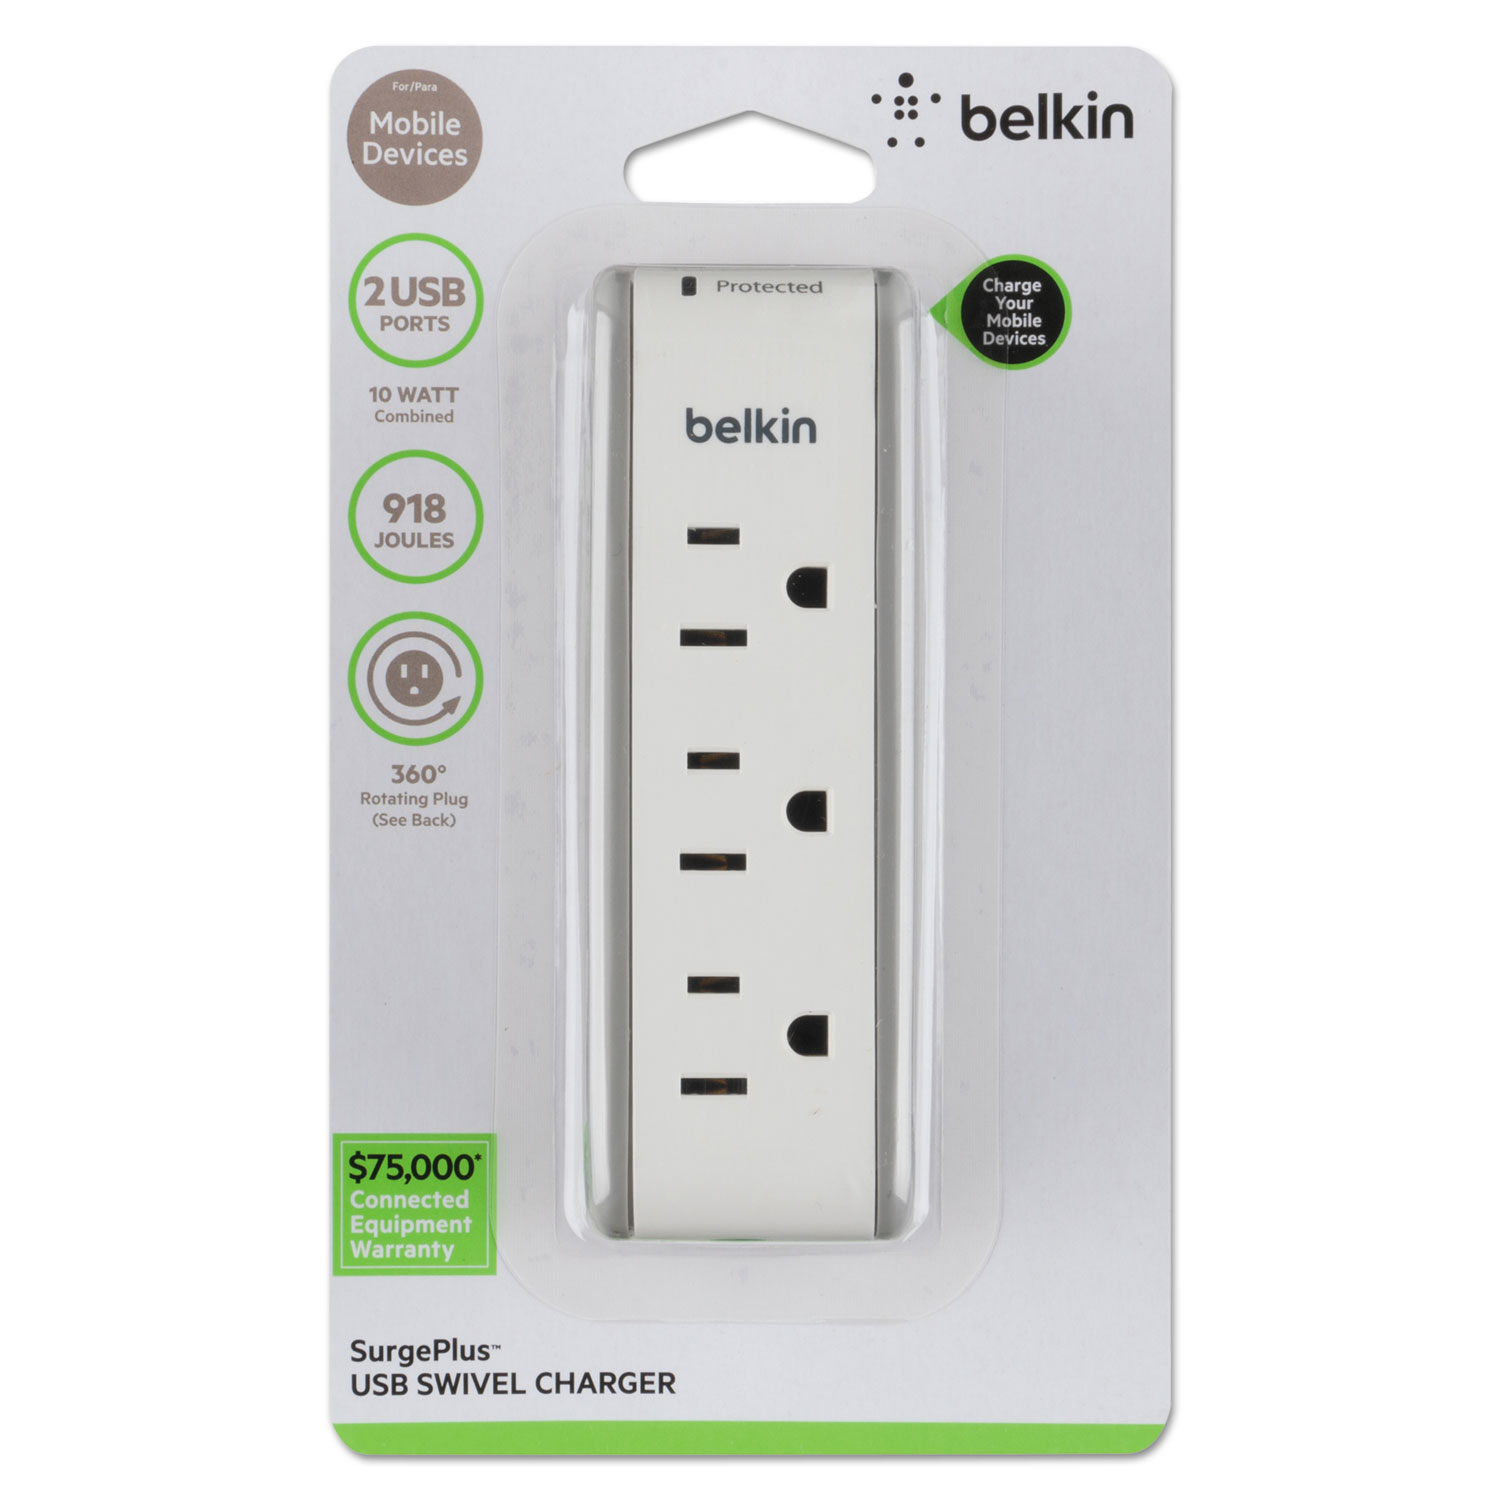 SurgePlus USB Swivel Charger, 3 Outlets/2 USB Ports, 918 Joules, White